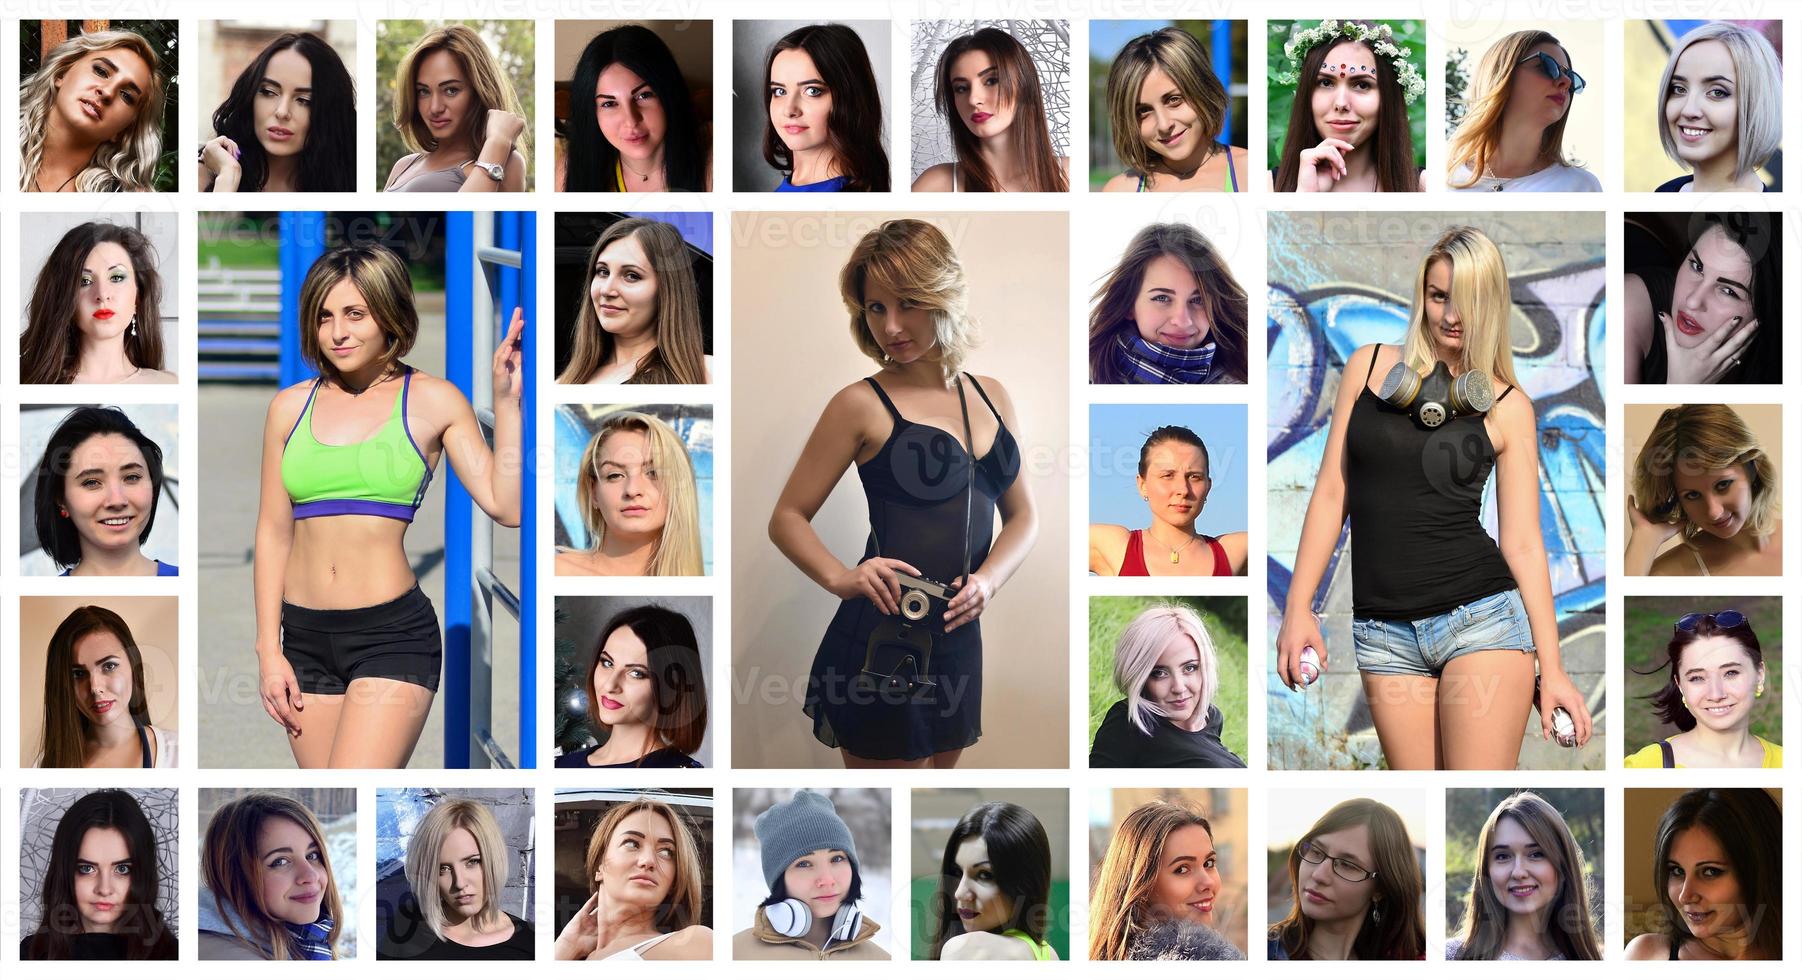 Collage group portraits of young caucasian girls for social medi photo